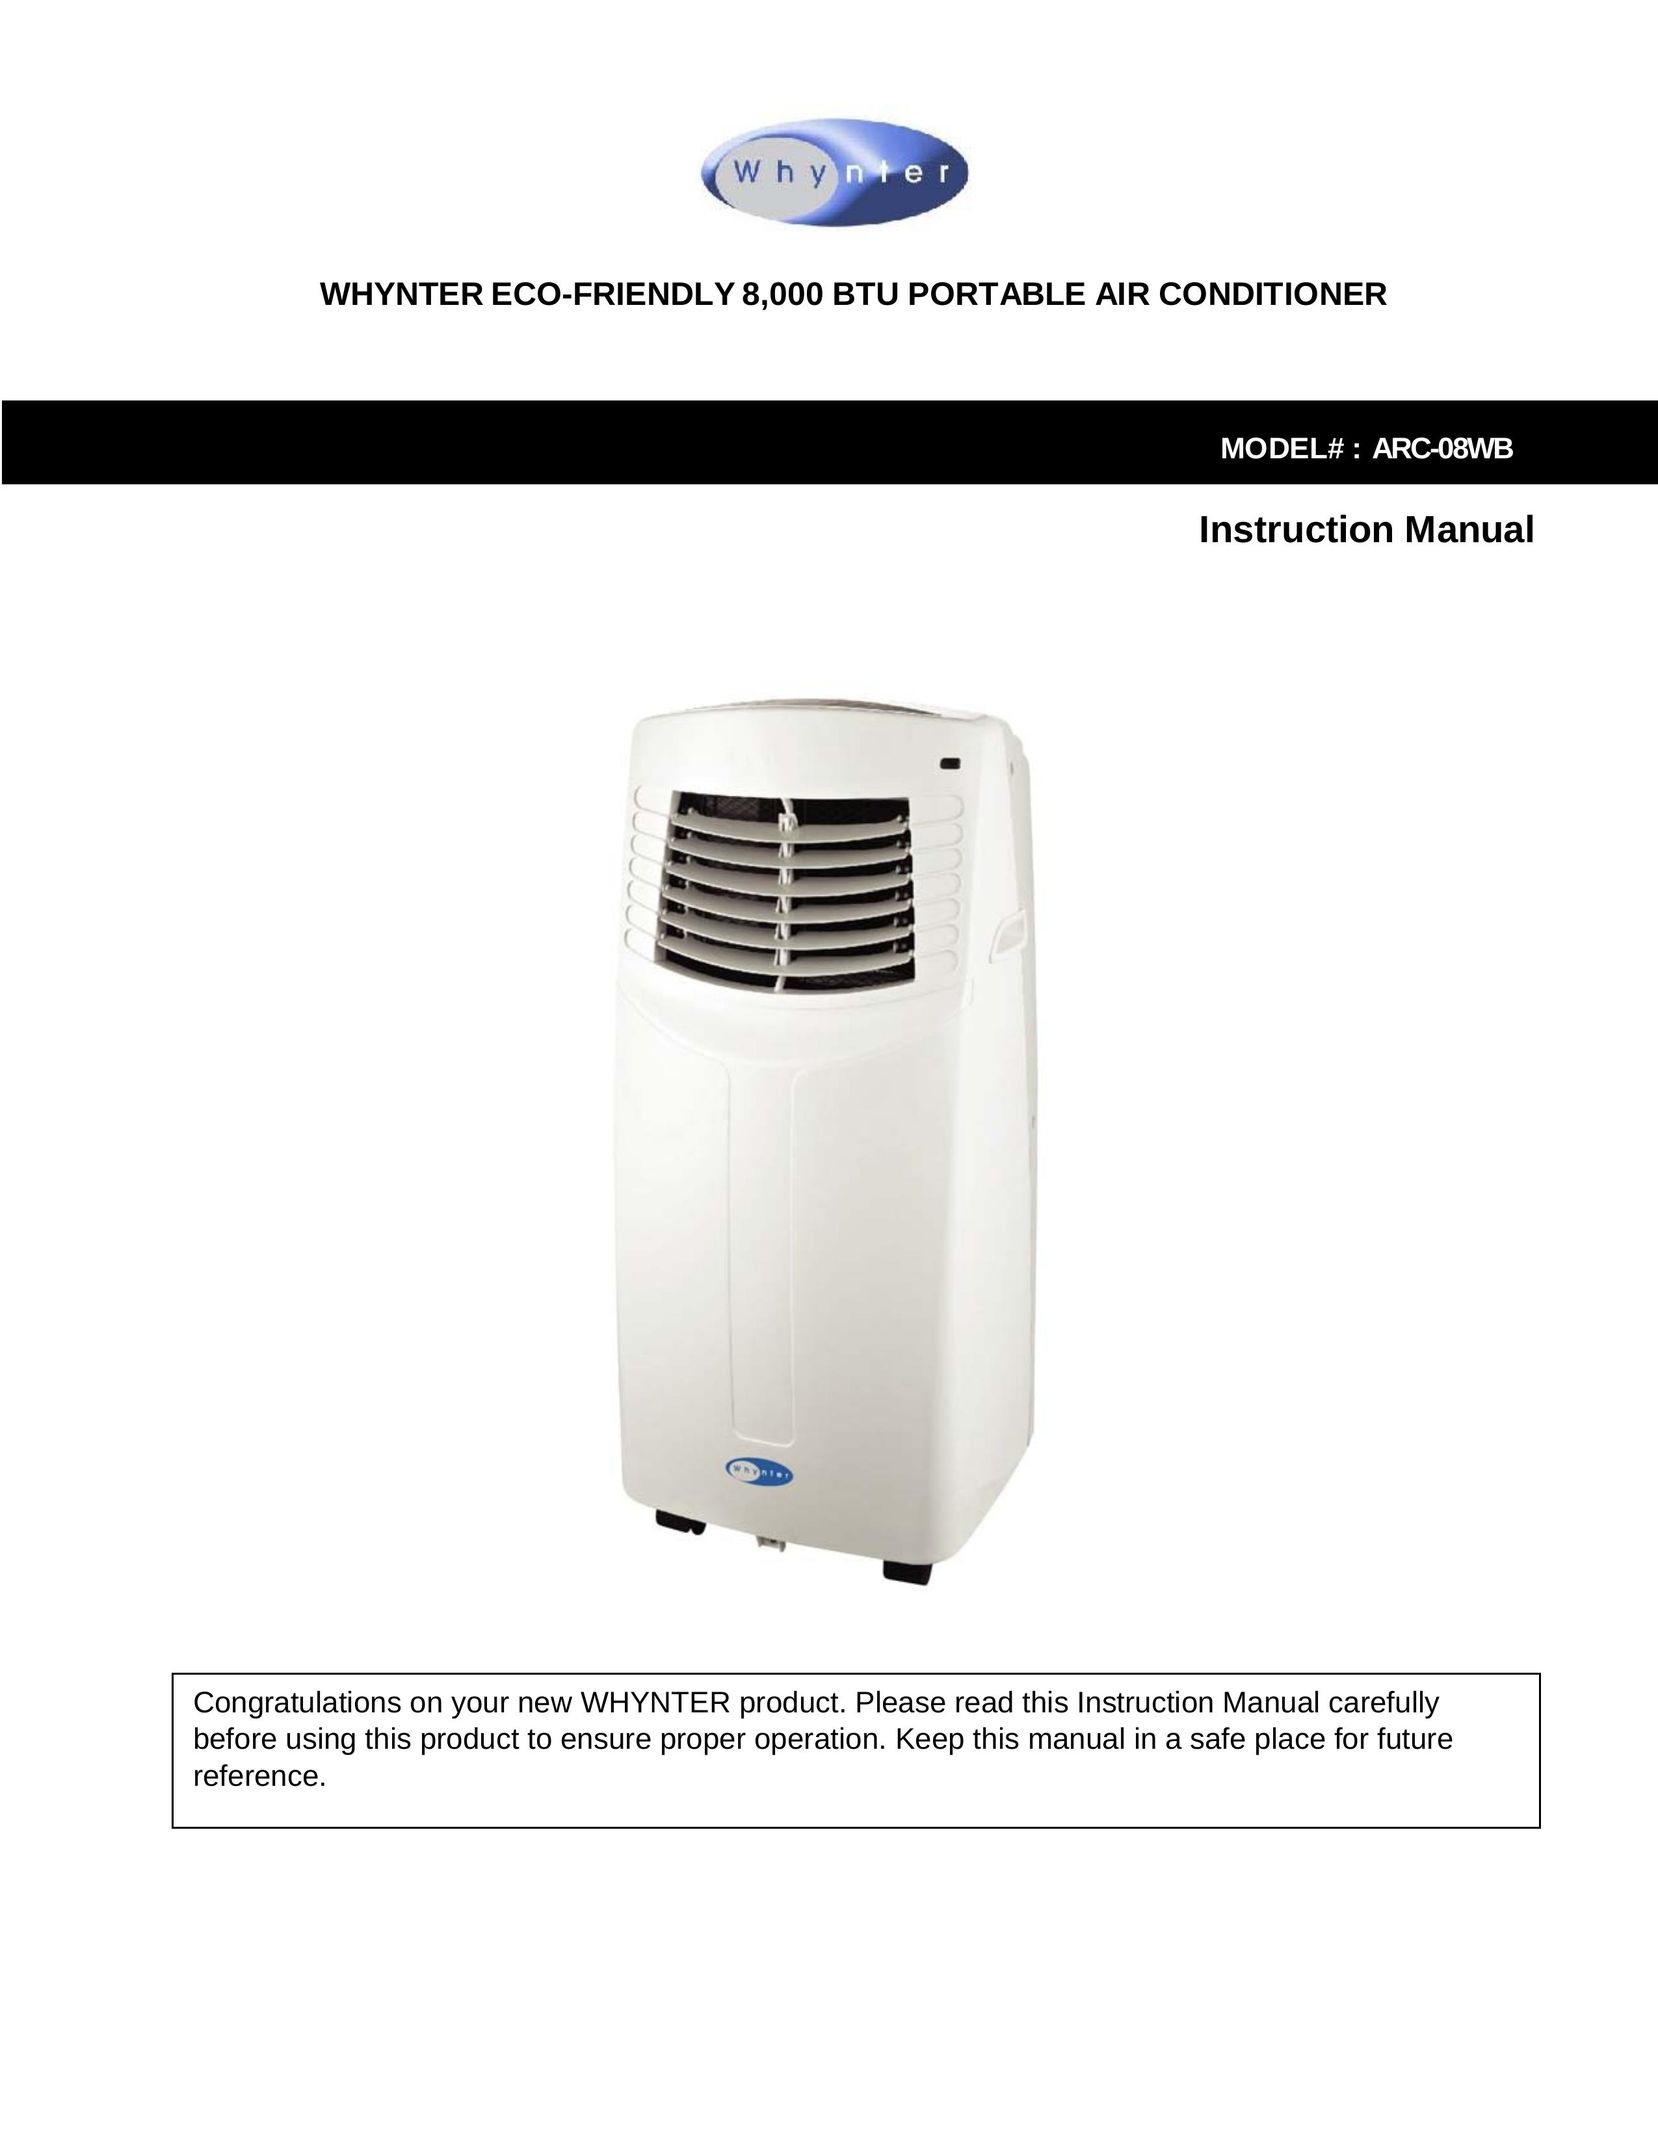 Whynter ARC-08WB Air Conditioner User Manual